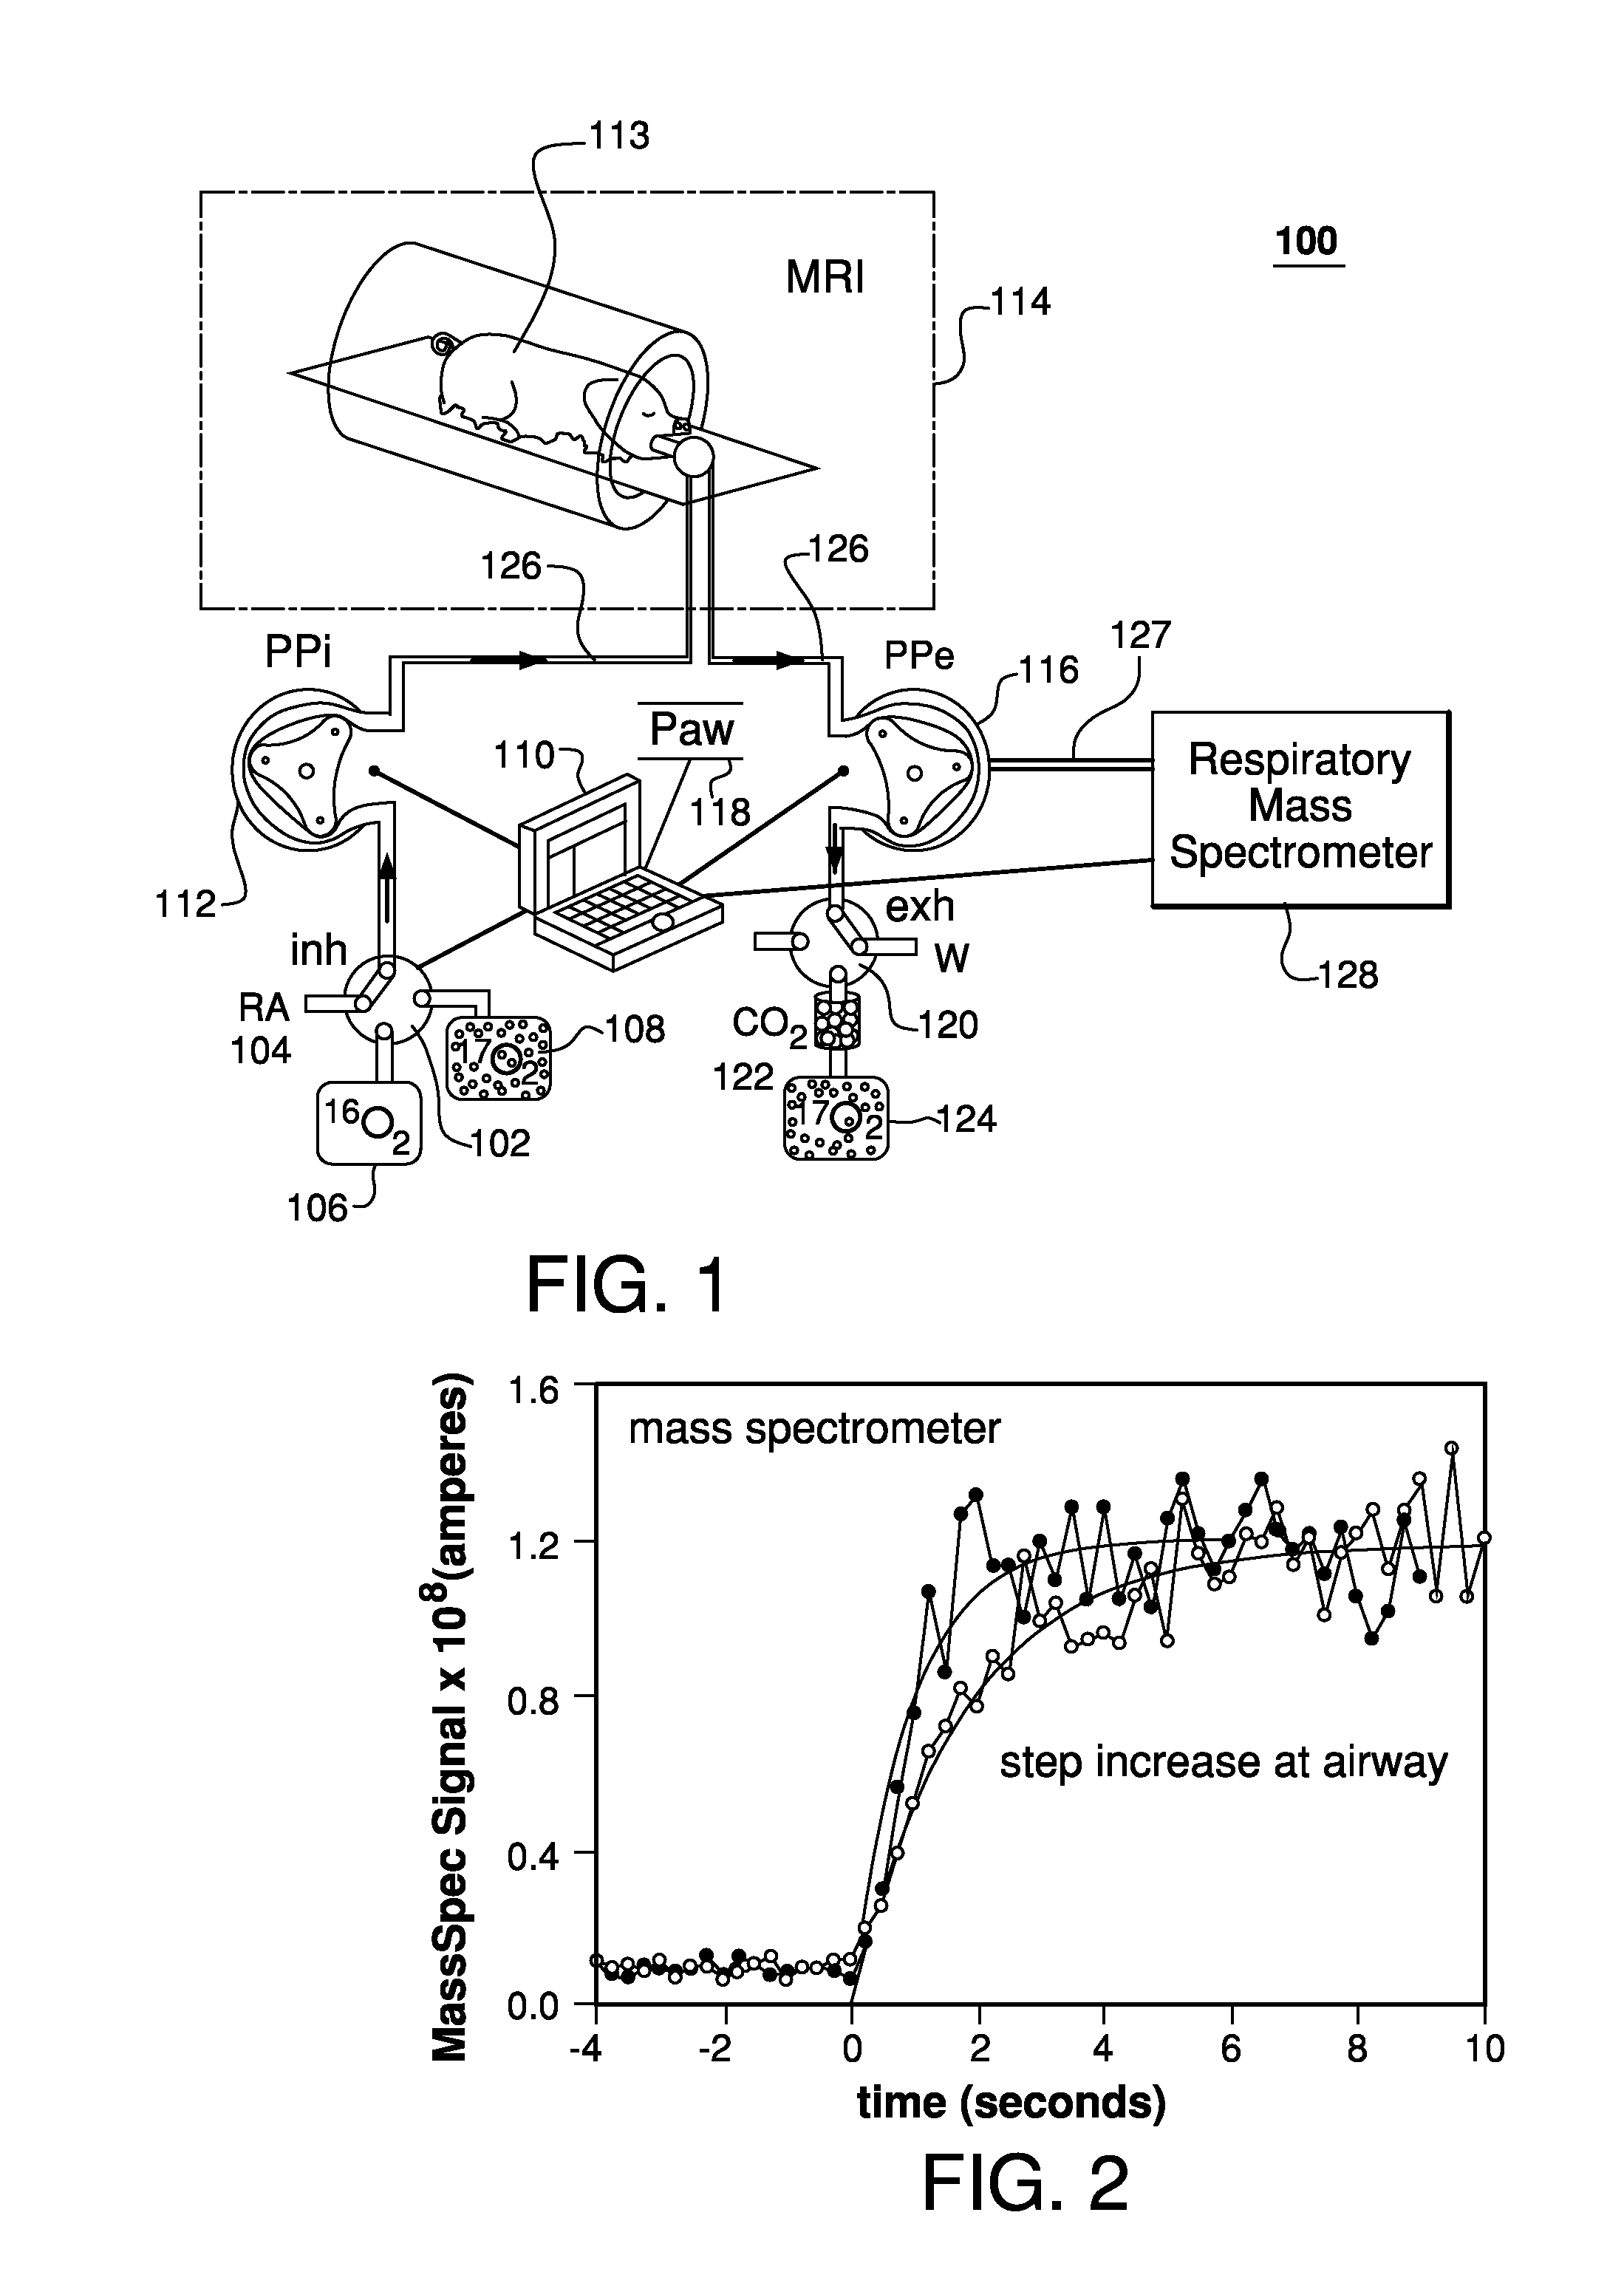 Method and apparatus for providing pulses inhalation of 17o2 for magnetic resonance imaging of cerebral metabolism